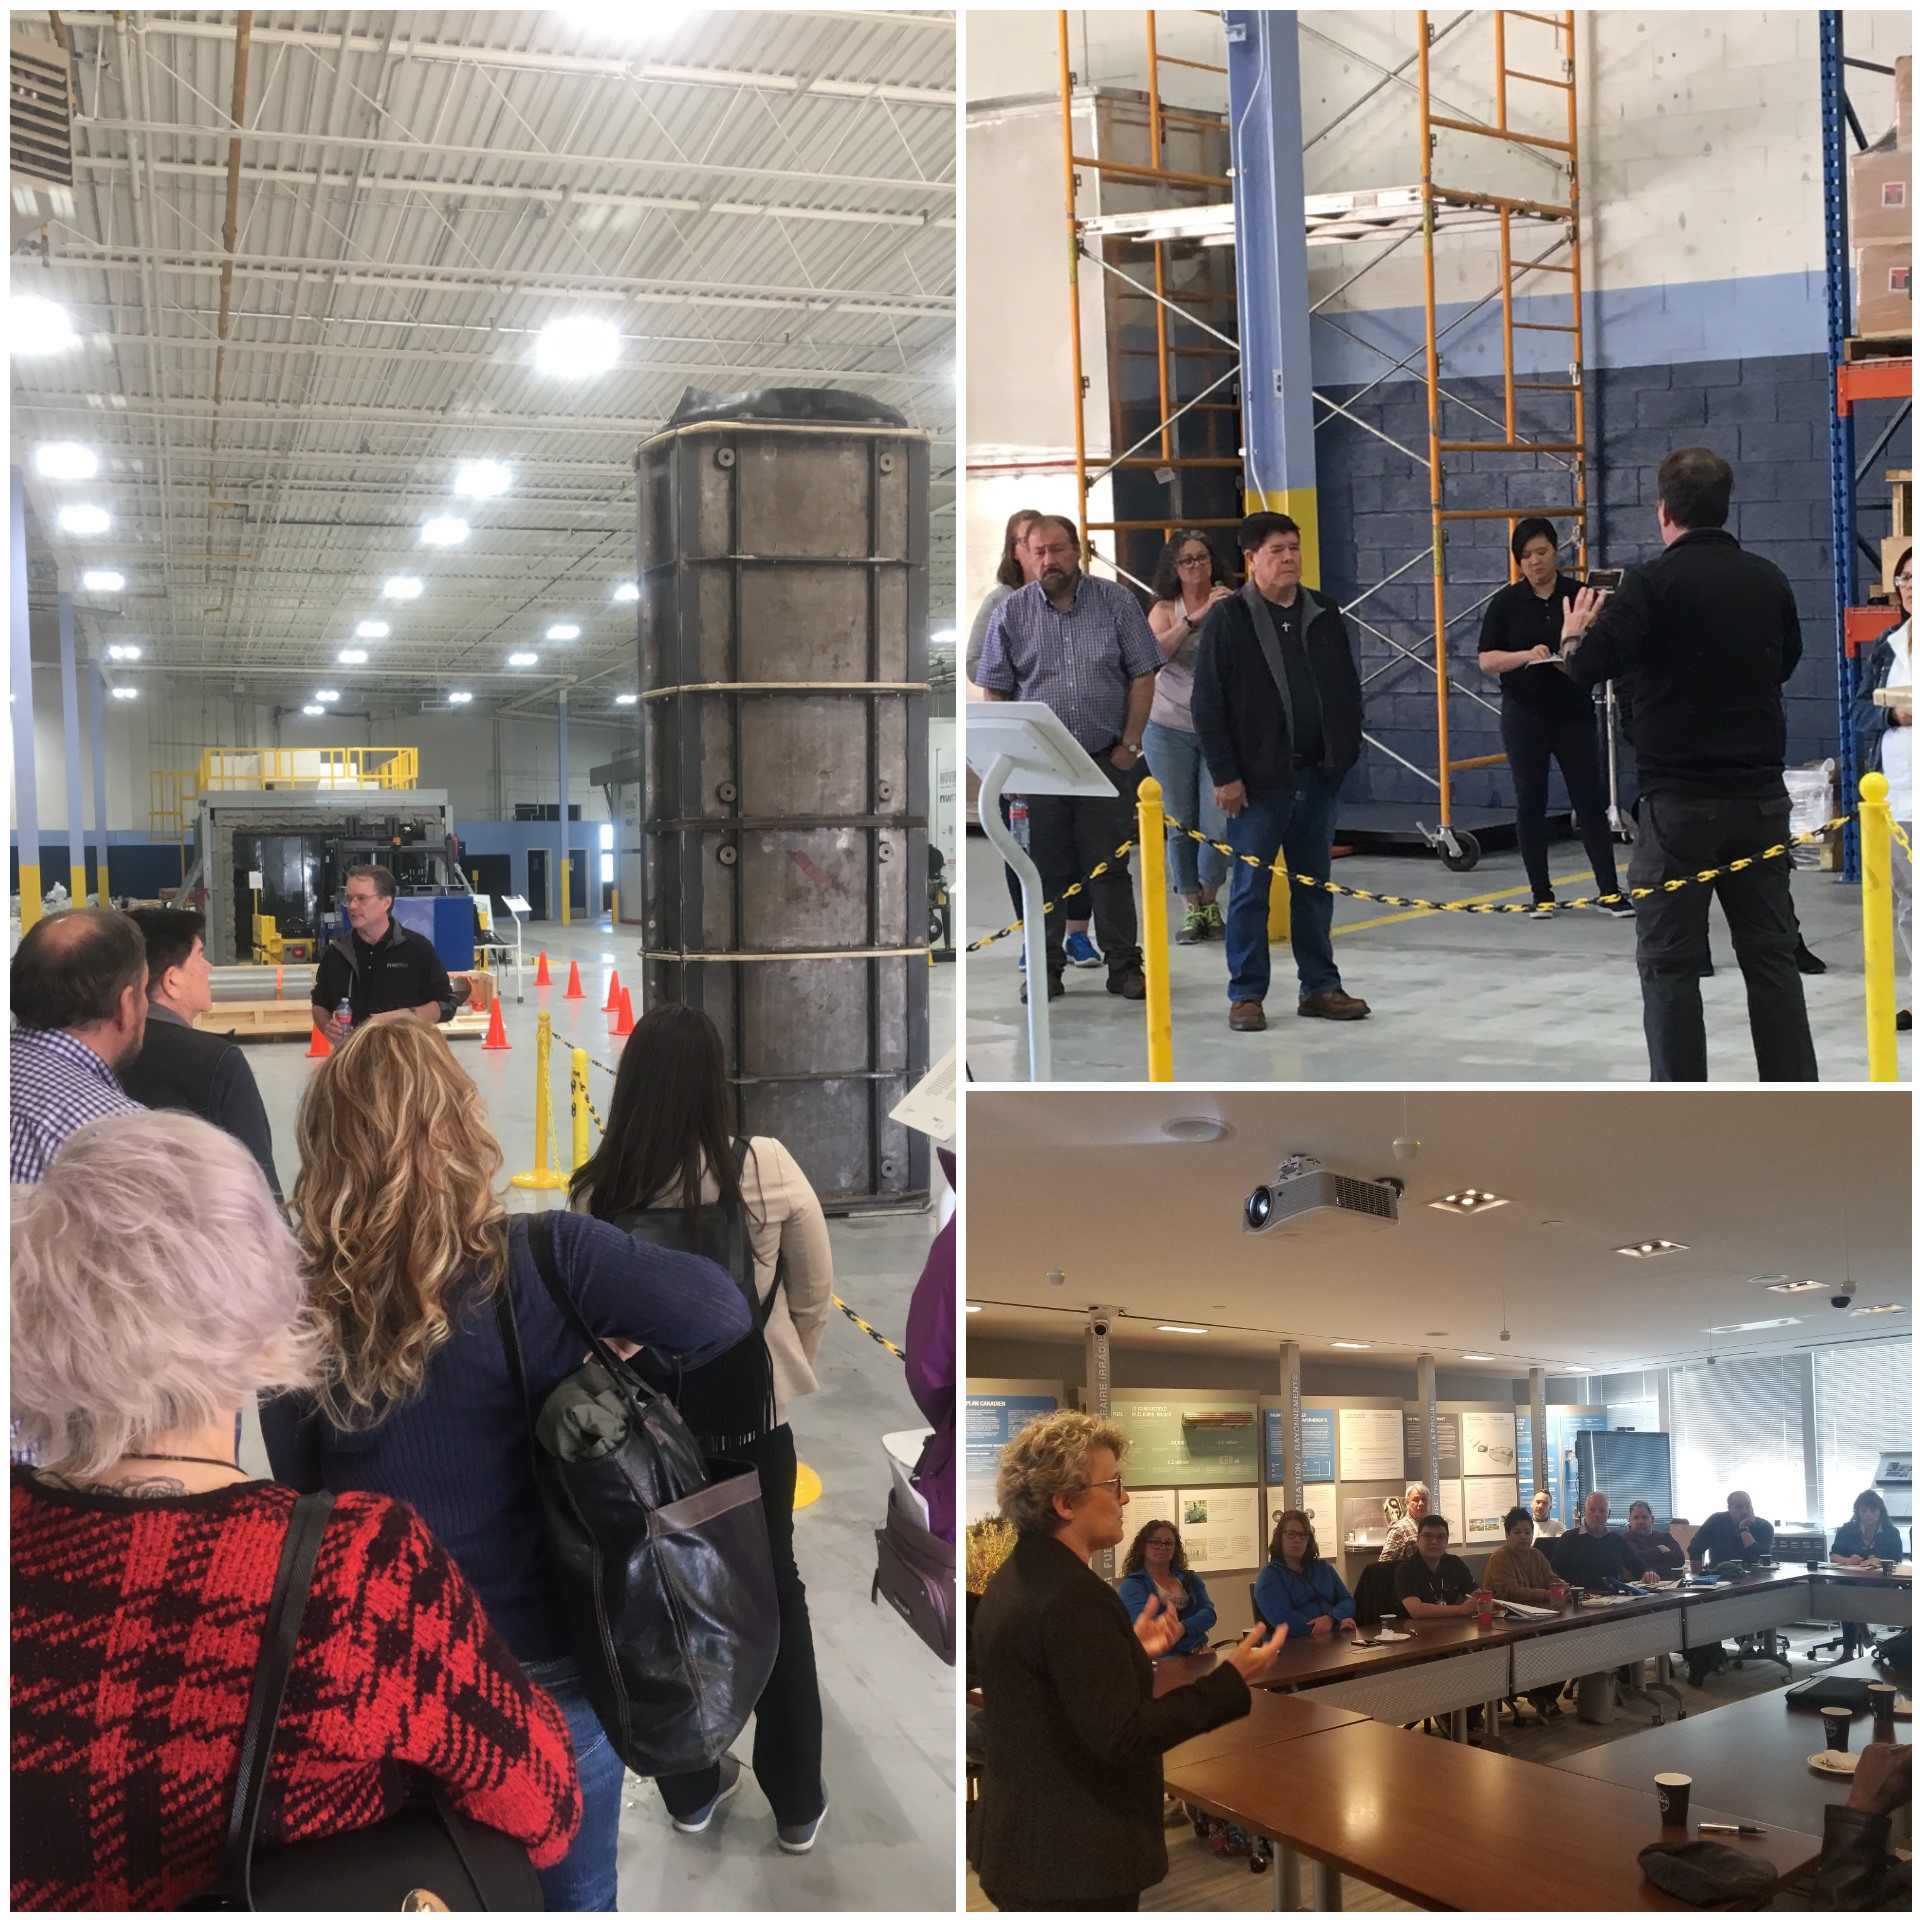 Community leaders and members of Indigenous communities recently travelled thousands of kilometres to visit the Nuclear Waste Management Organization (NWMO) and our proof test facility in Oakville to learn more about Canada’s plan for used nuclear fuel and the associated engagement process.